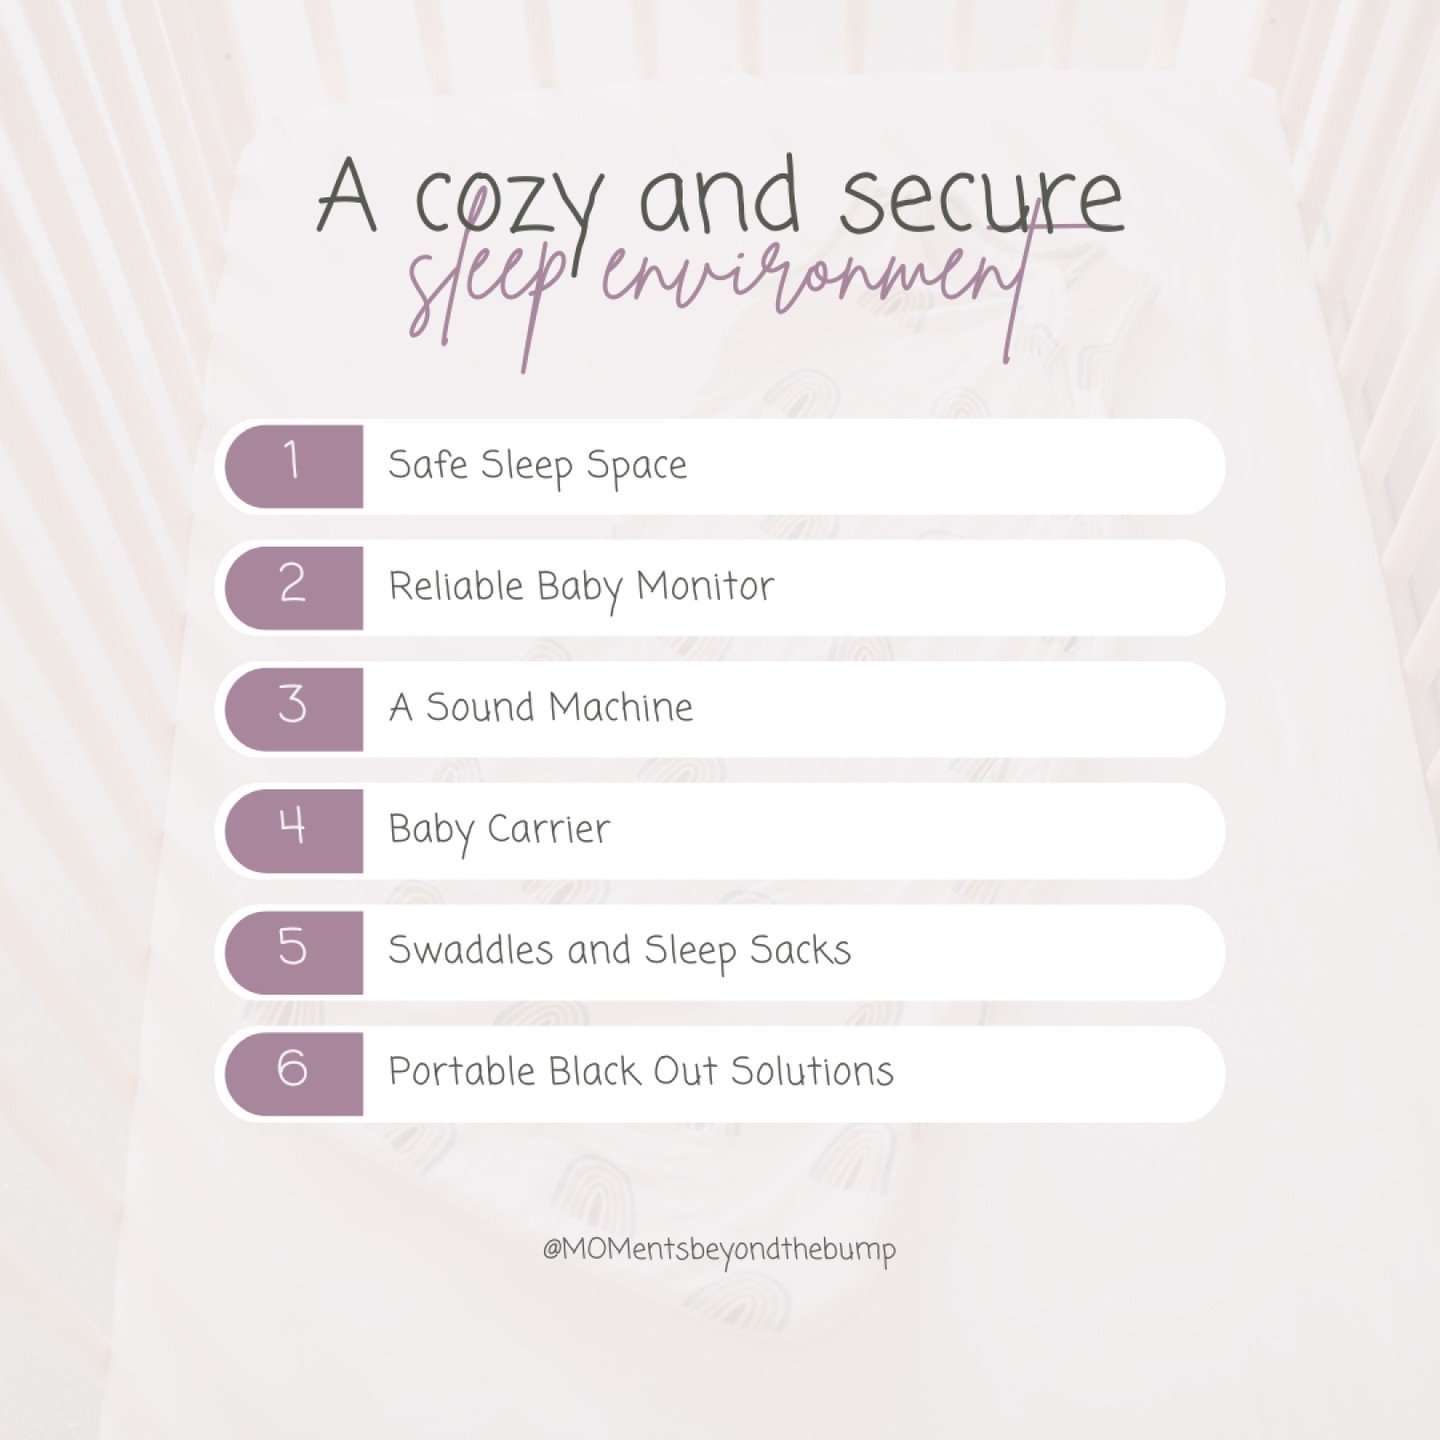 Here&rsquo;s a roundup of 6 essential items that I swear by for creating a cozy and secure sleep environment for your little one, based on my personal experience as a mom:

1⃣ A safe sleep space: 
Whether it's a bassinet, mini crib, full crib, or pac